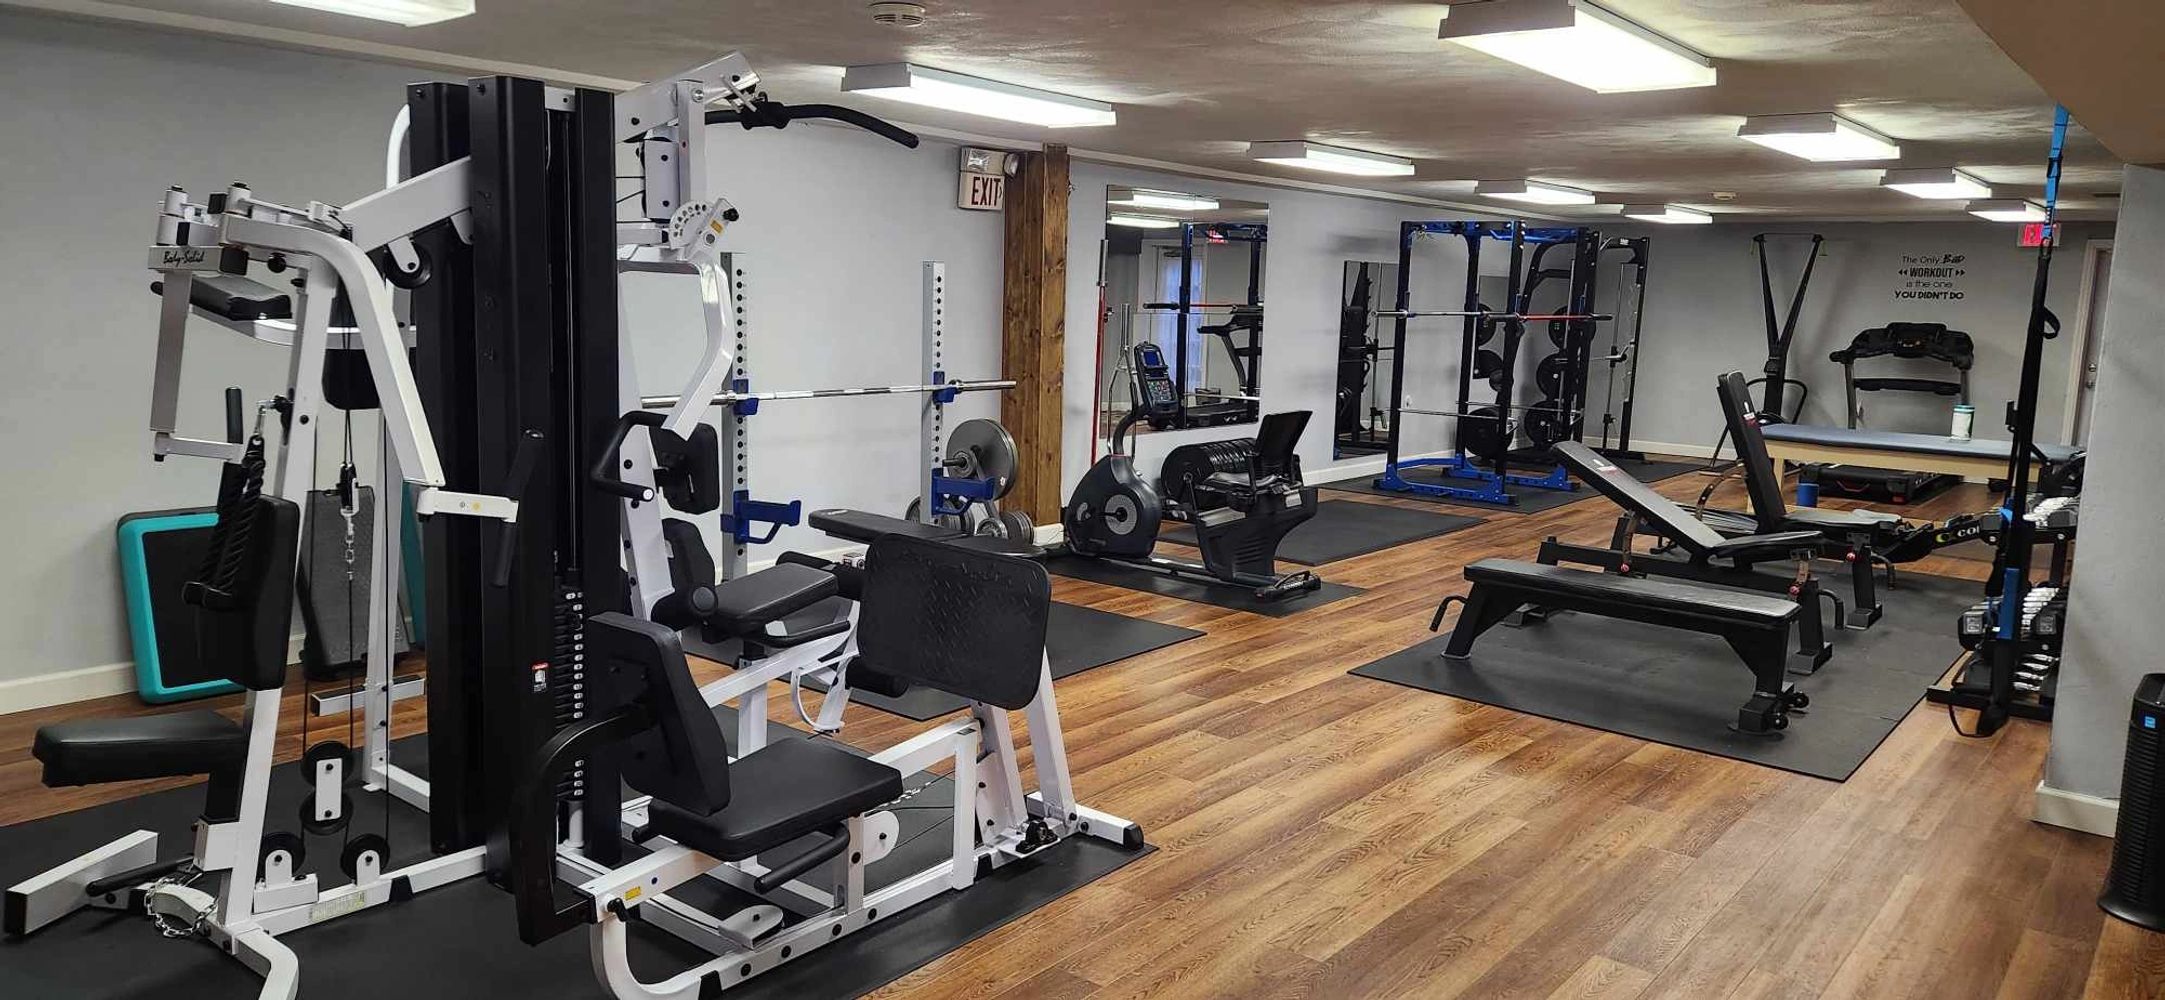 Gym equipment in a personal training studio